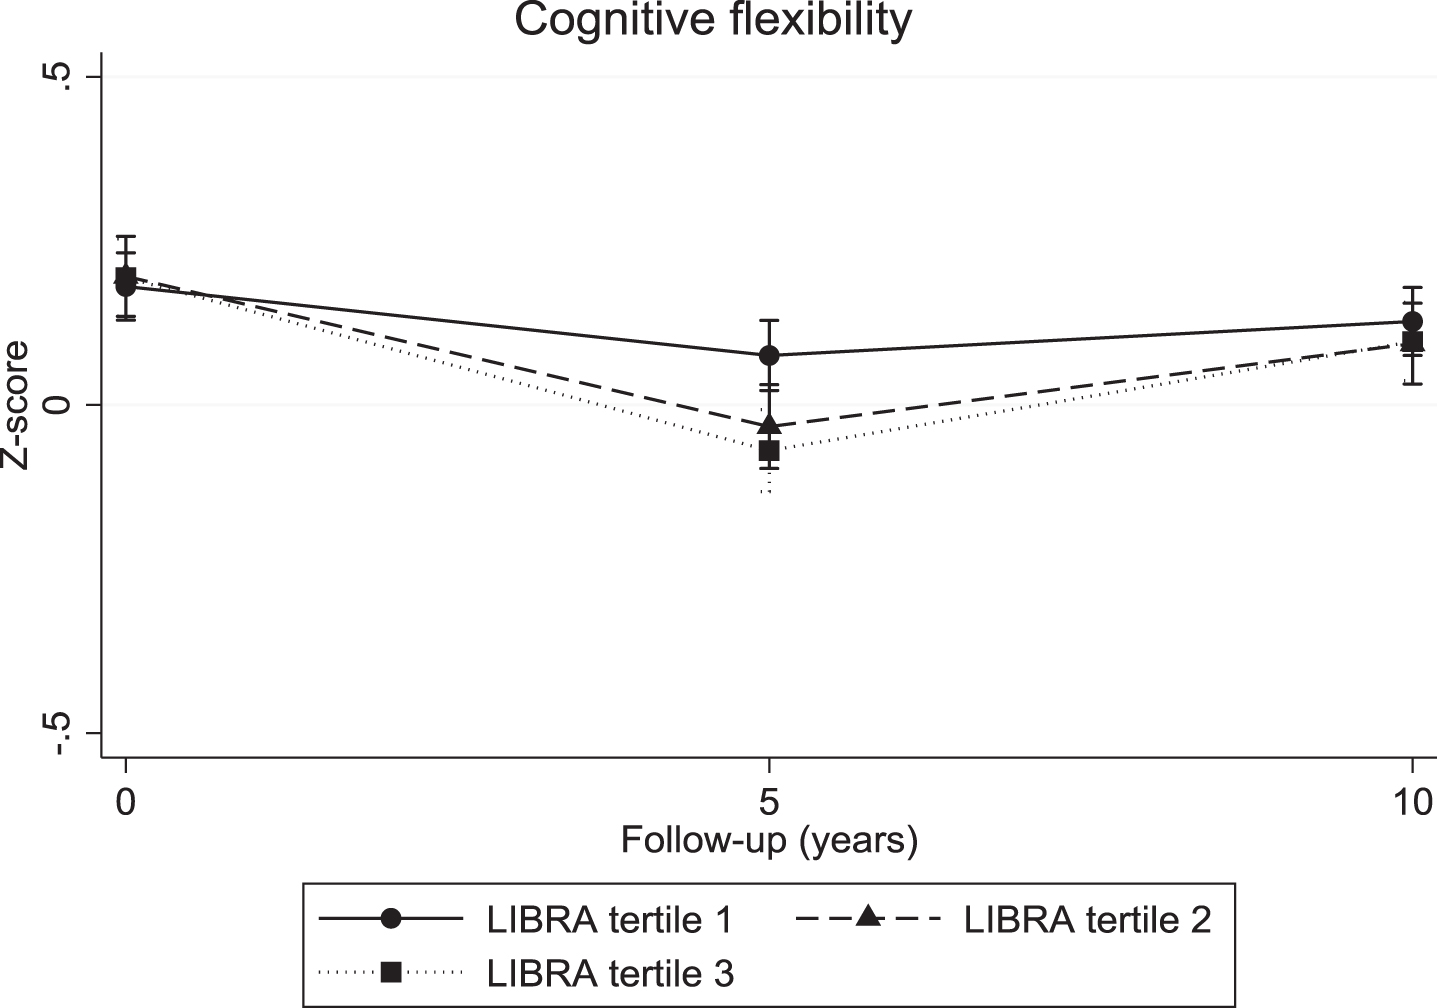 Cognitive flexibility trajectories for individuals in the three LIBRA risk groups.